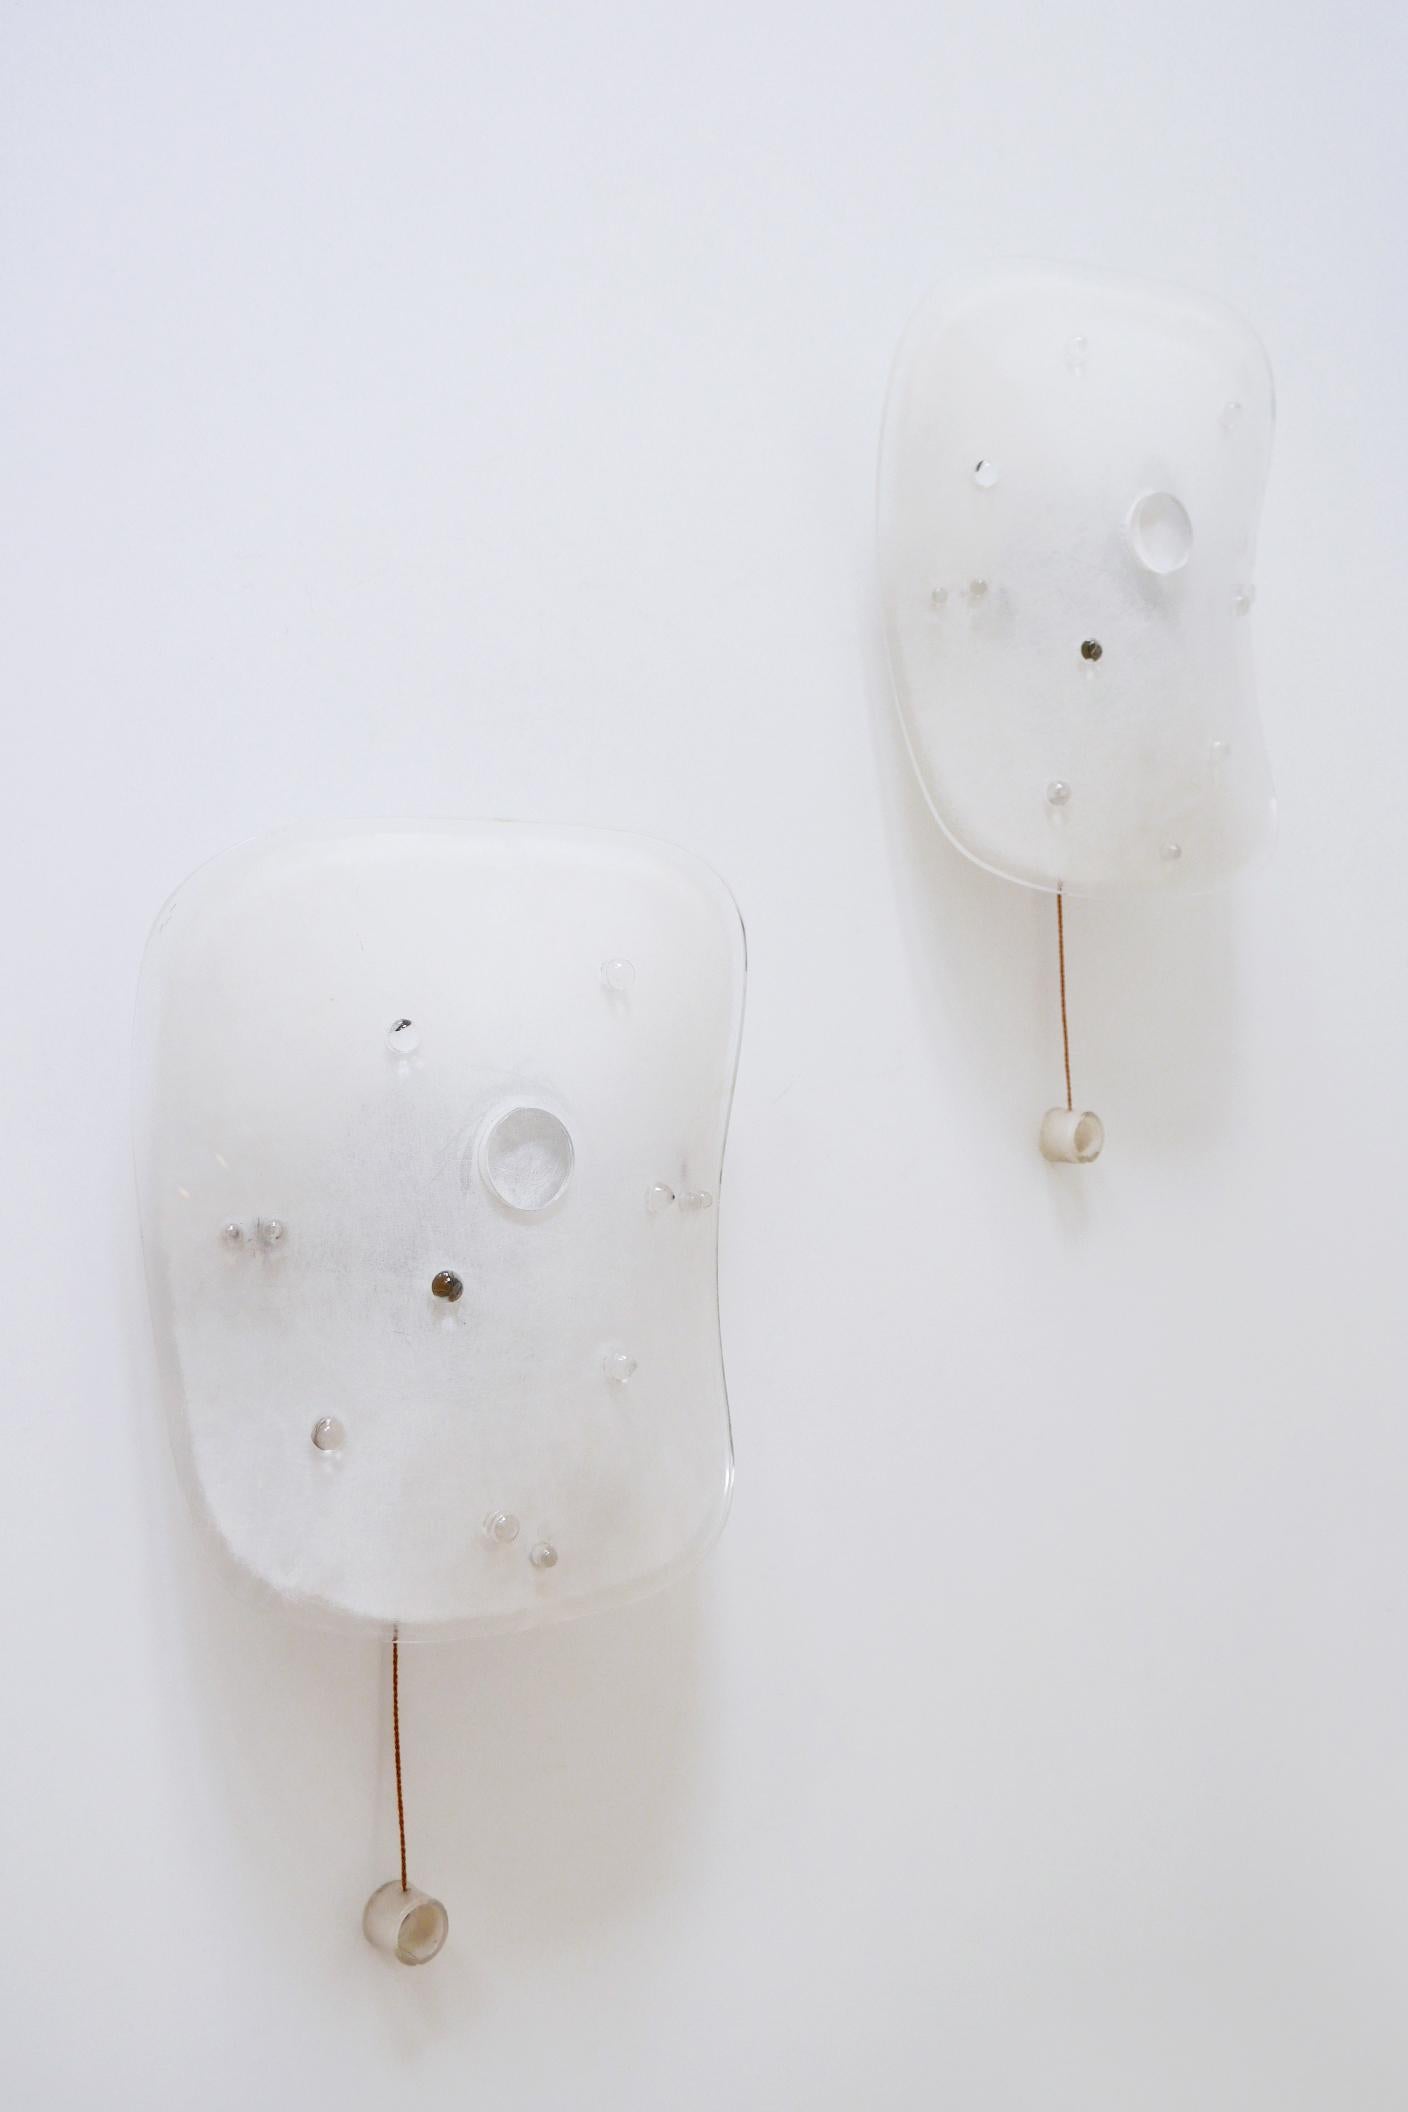 Set of Two Mid-Century Modern Lucite Wall Lamps Sconces by Rupert Nikoll, 1960s For Sale 2